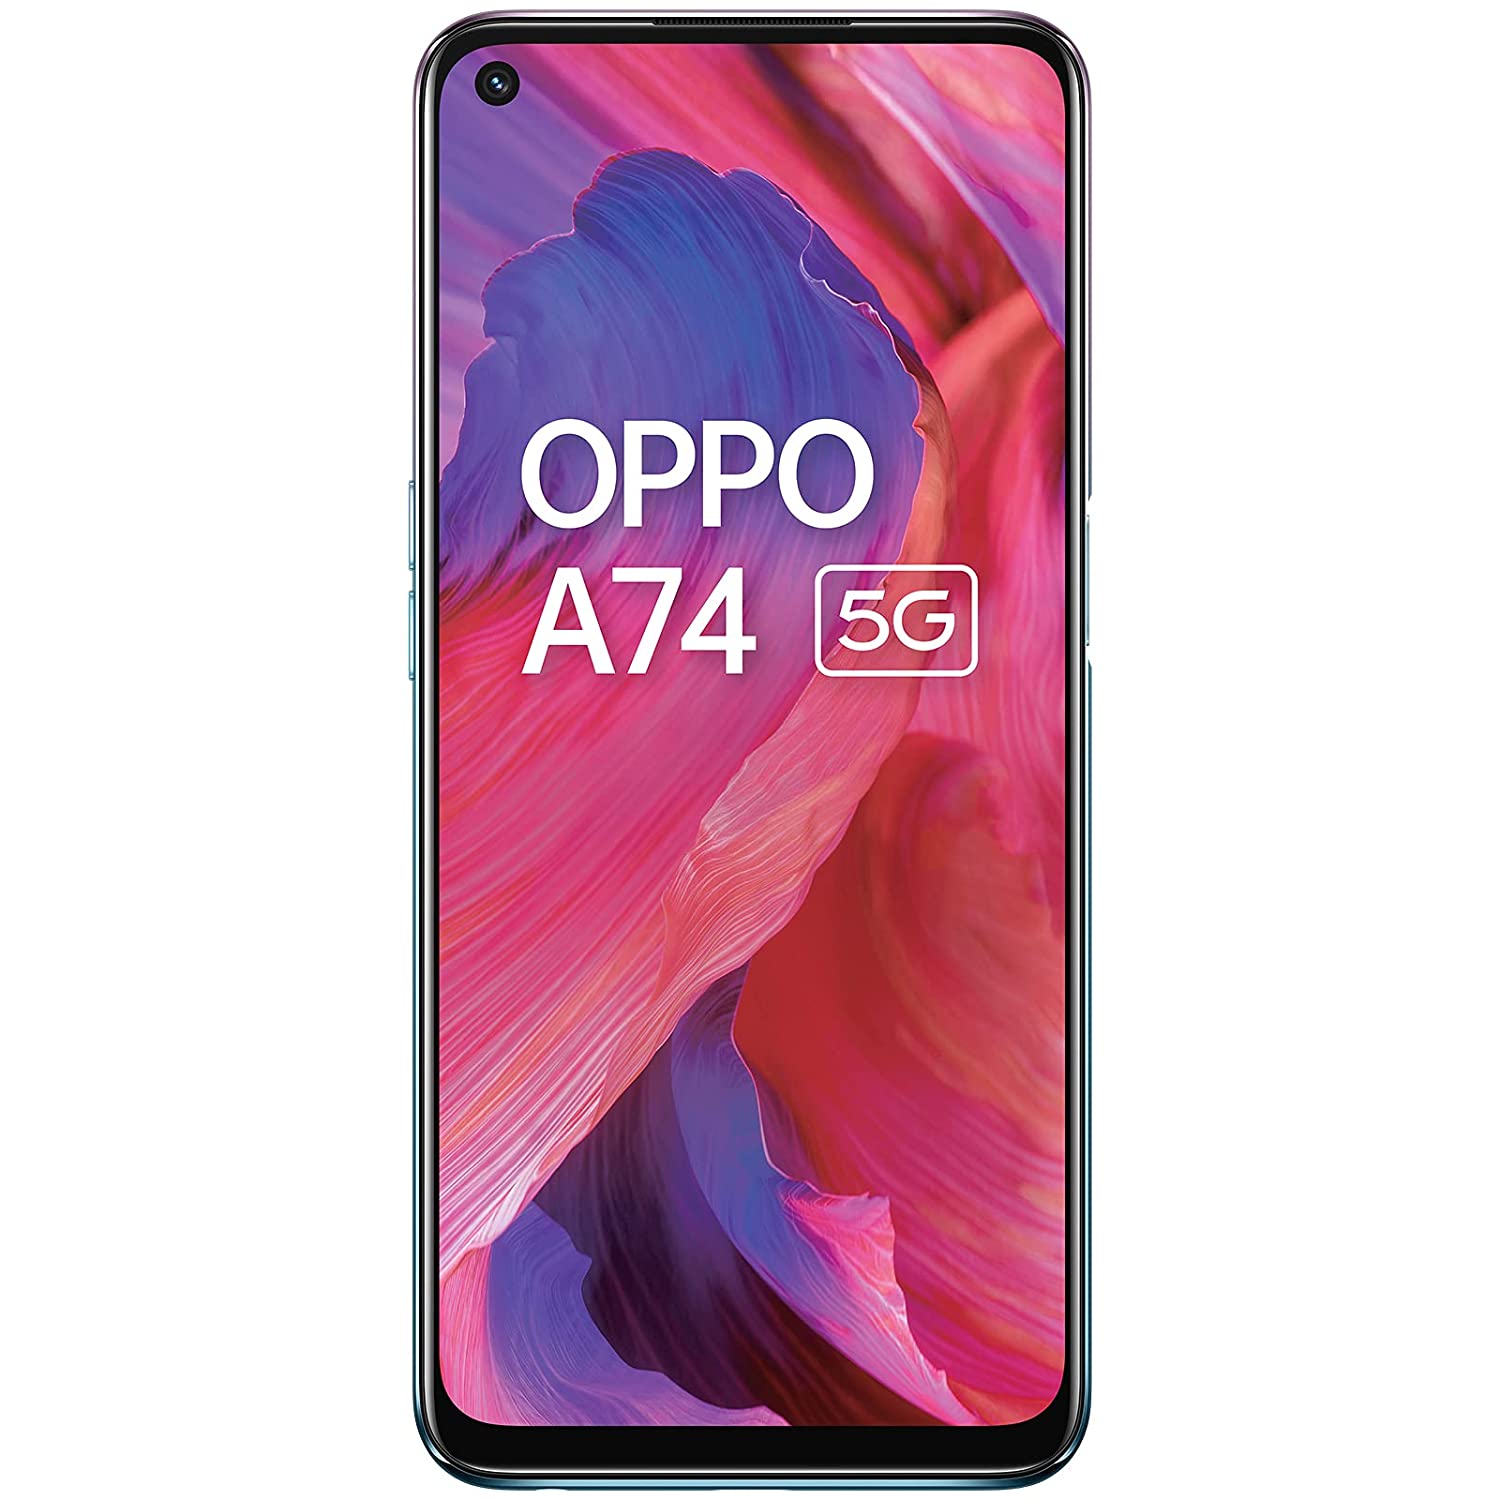 EXCLUSIVE DEAL | Buy OPPO A74 5G (6GB, 128 GB Storage ) With 90hz Display